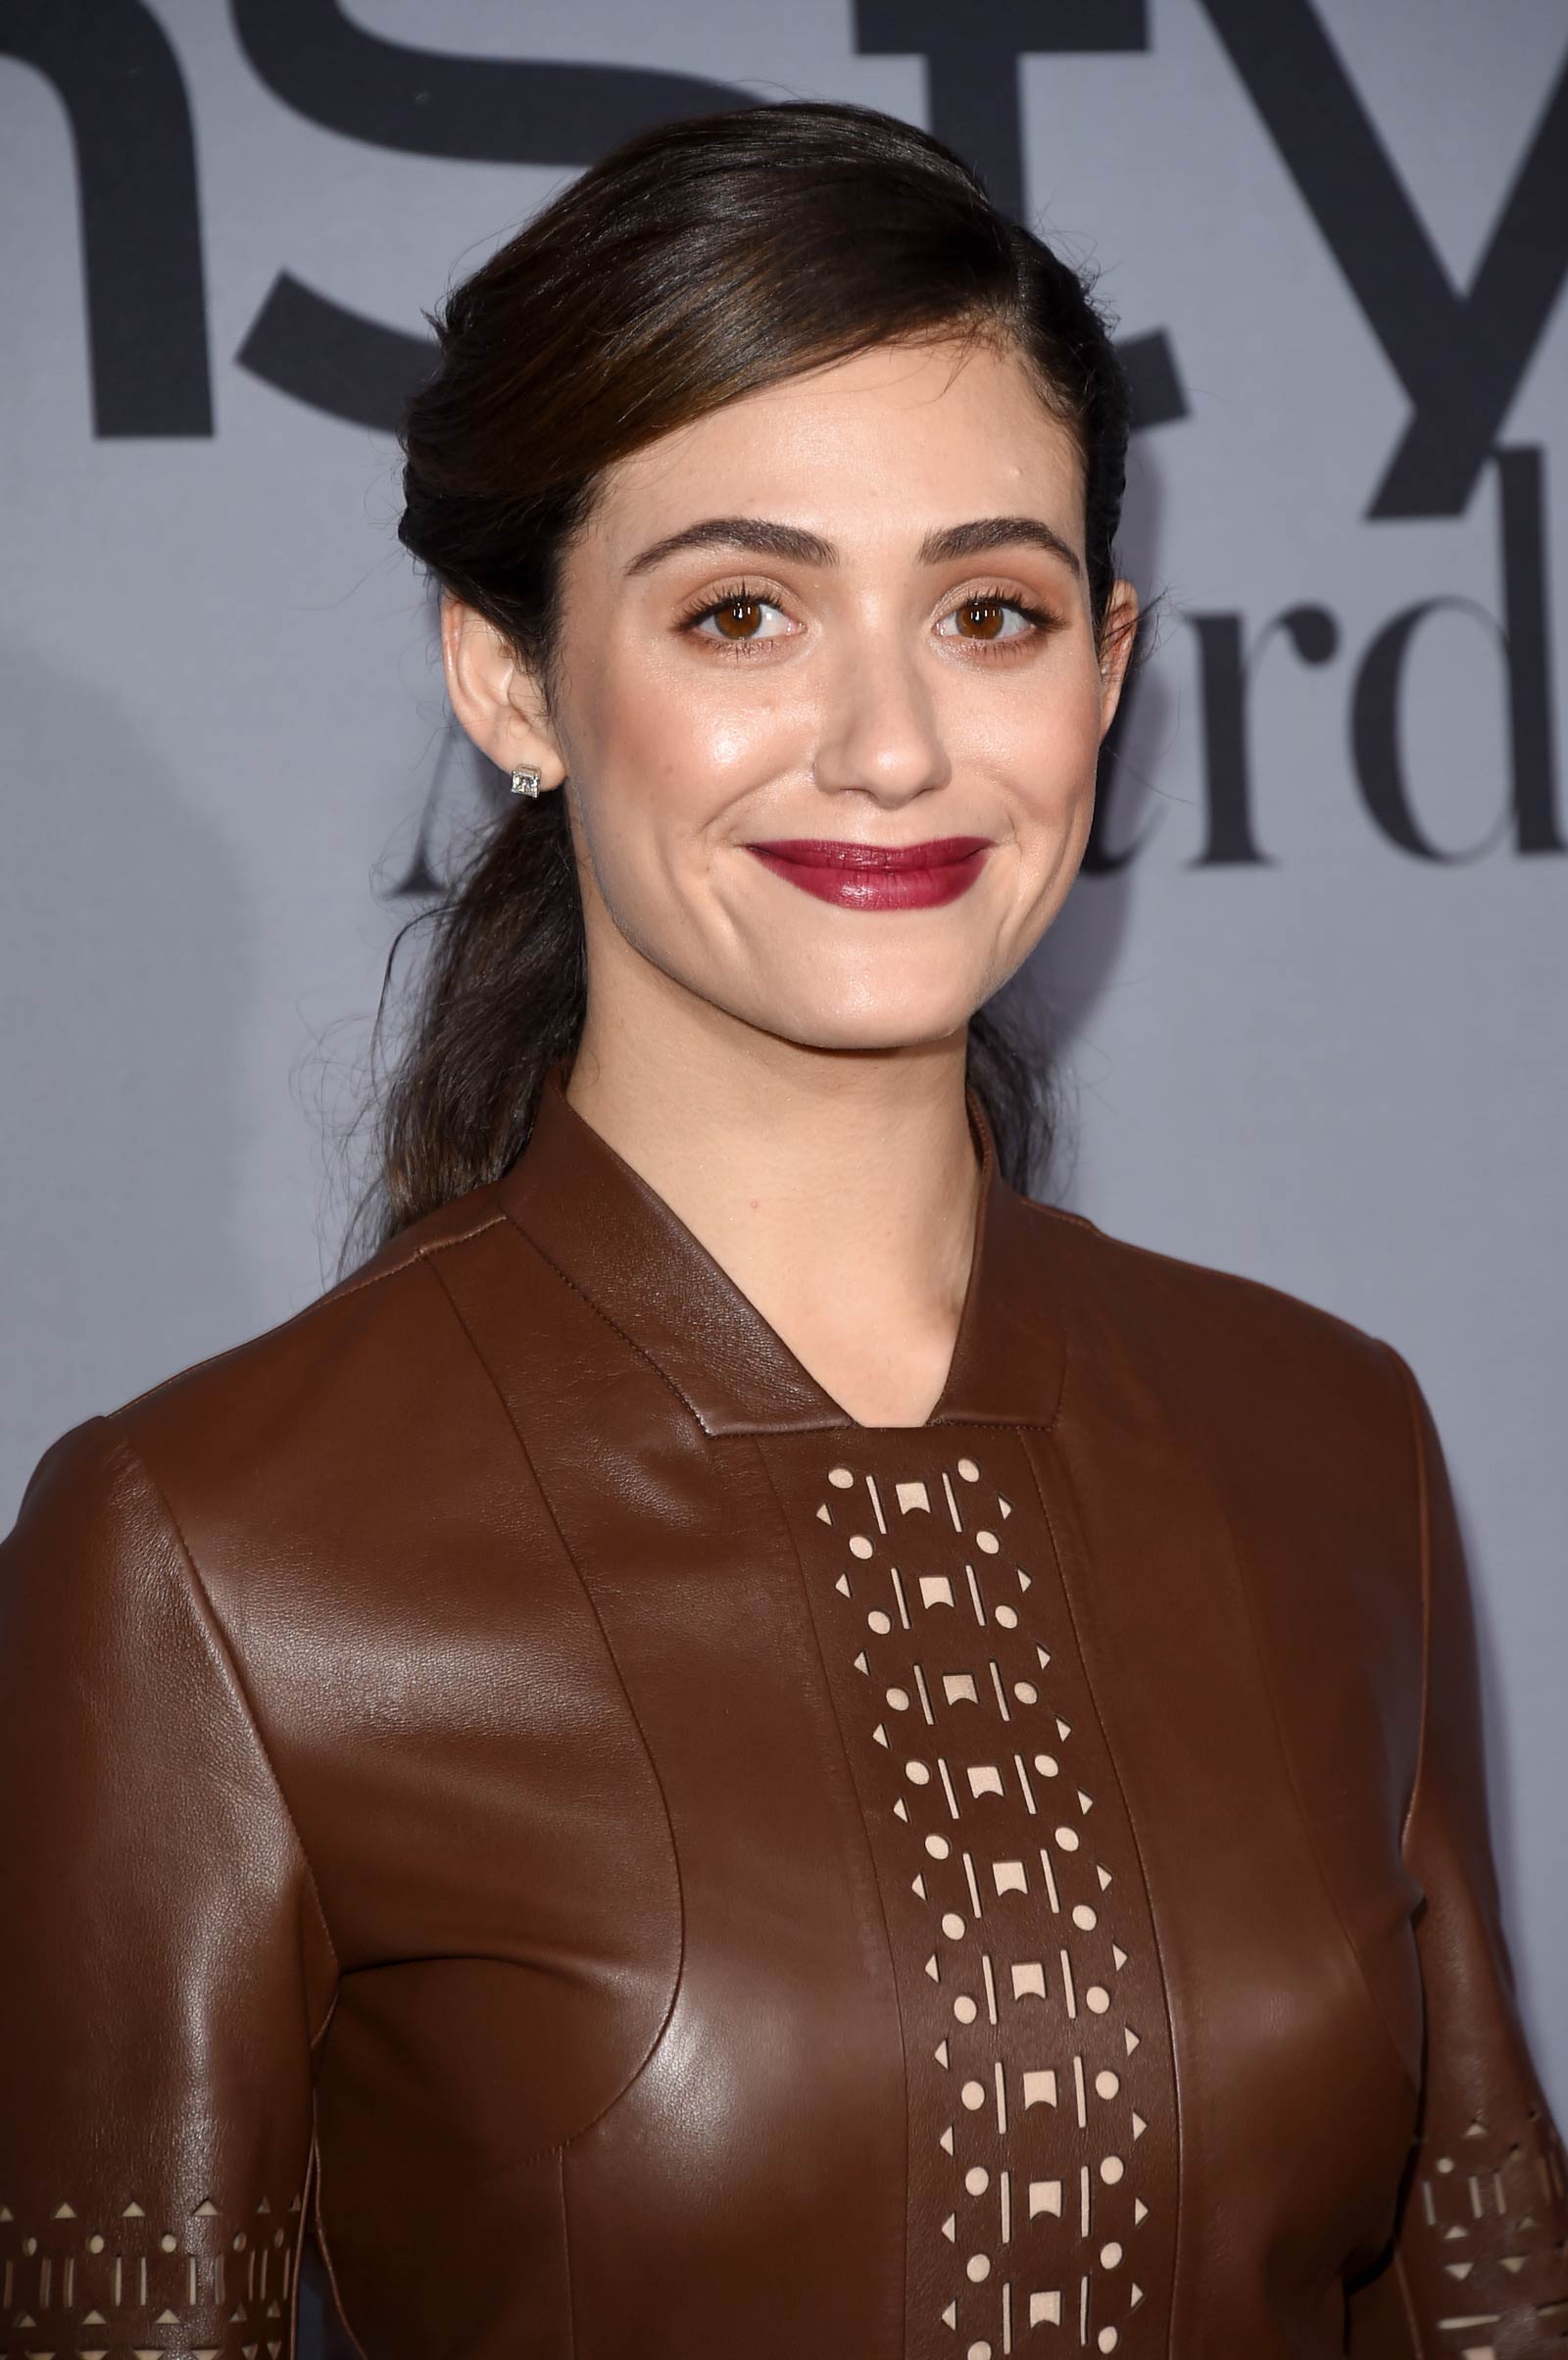 Emmy Rossum attends InStyle Awards